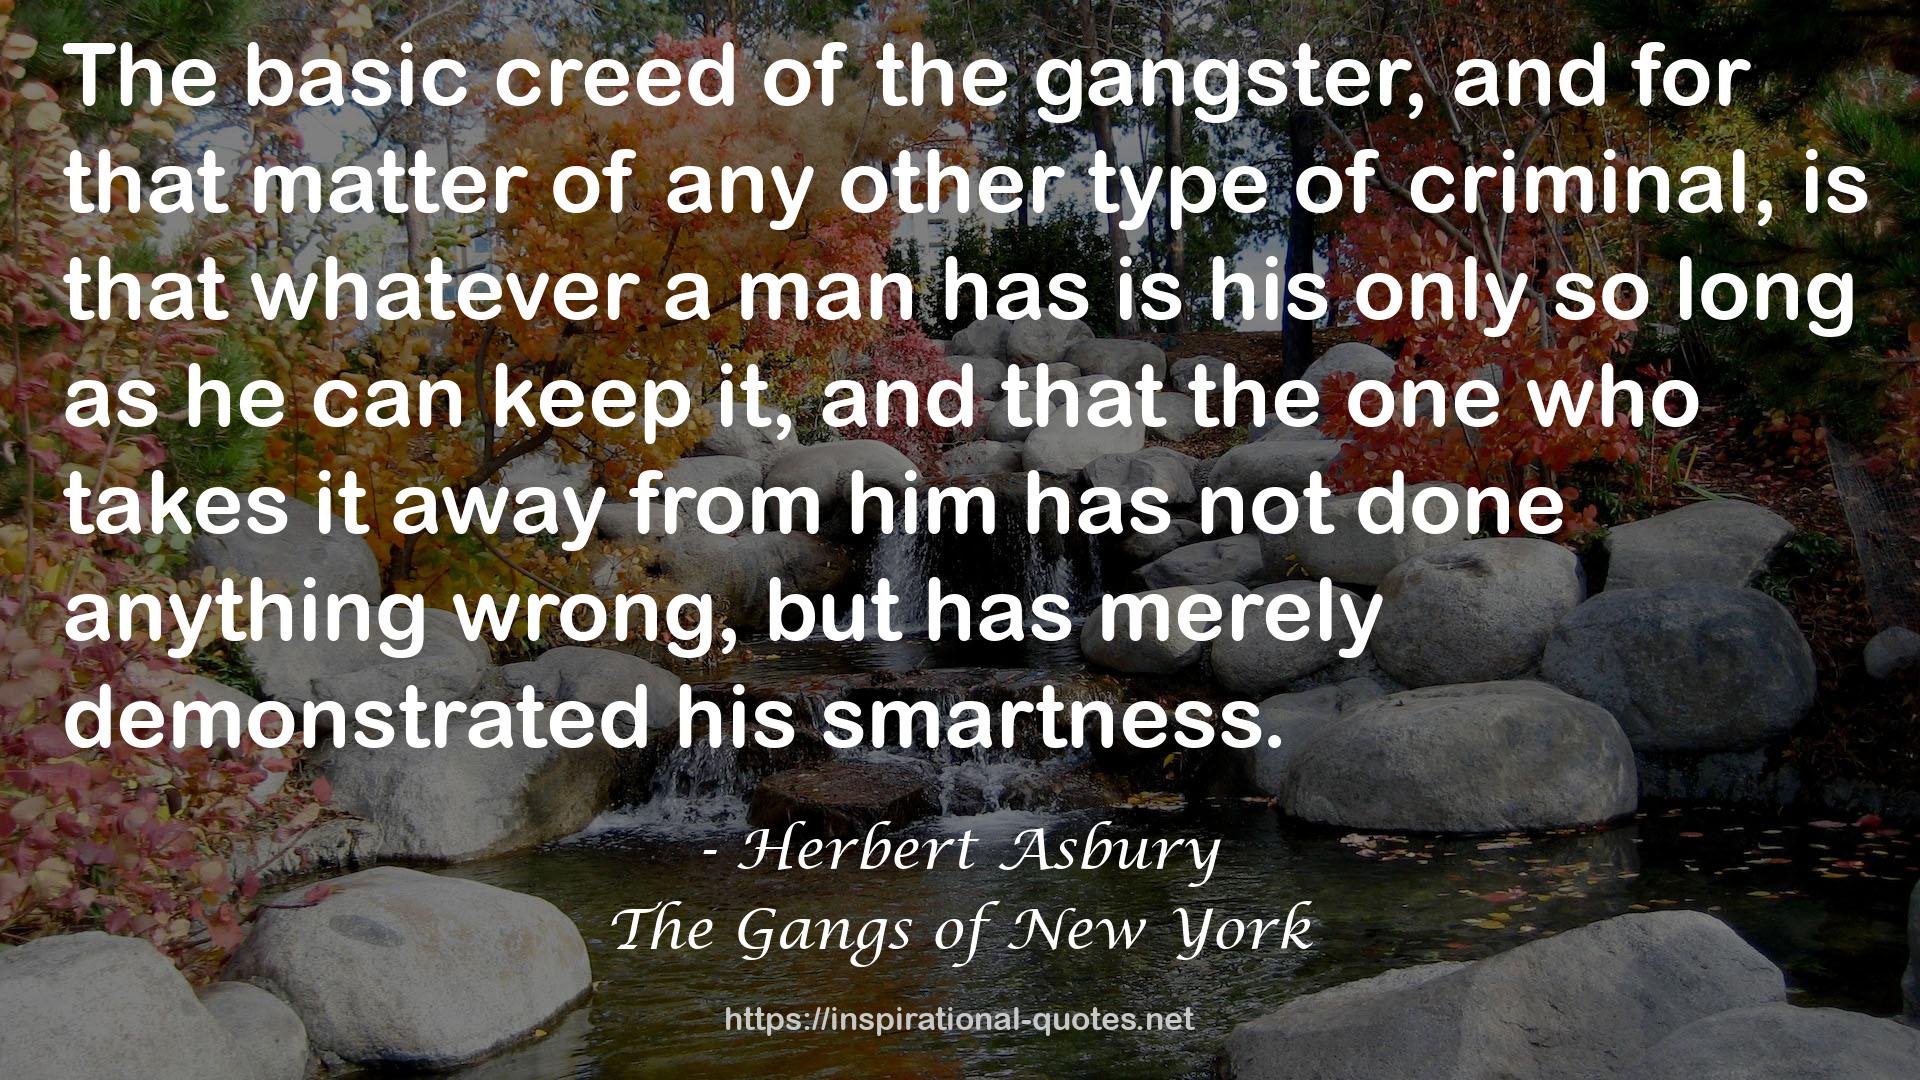 The Gangs of New York QUOTES